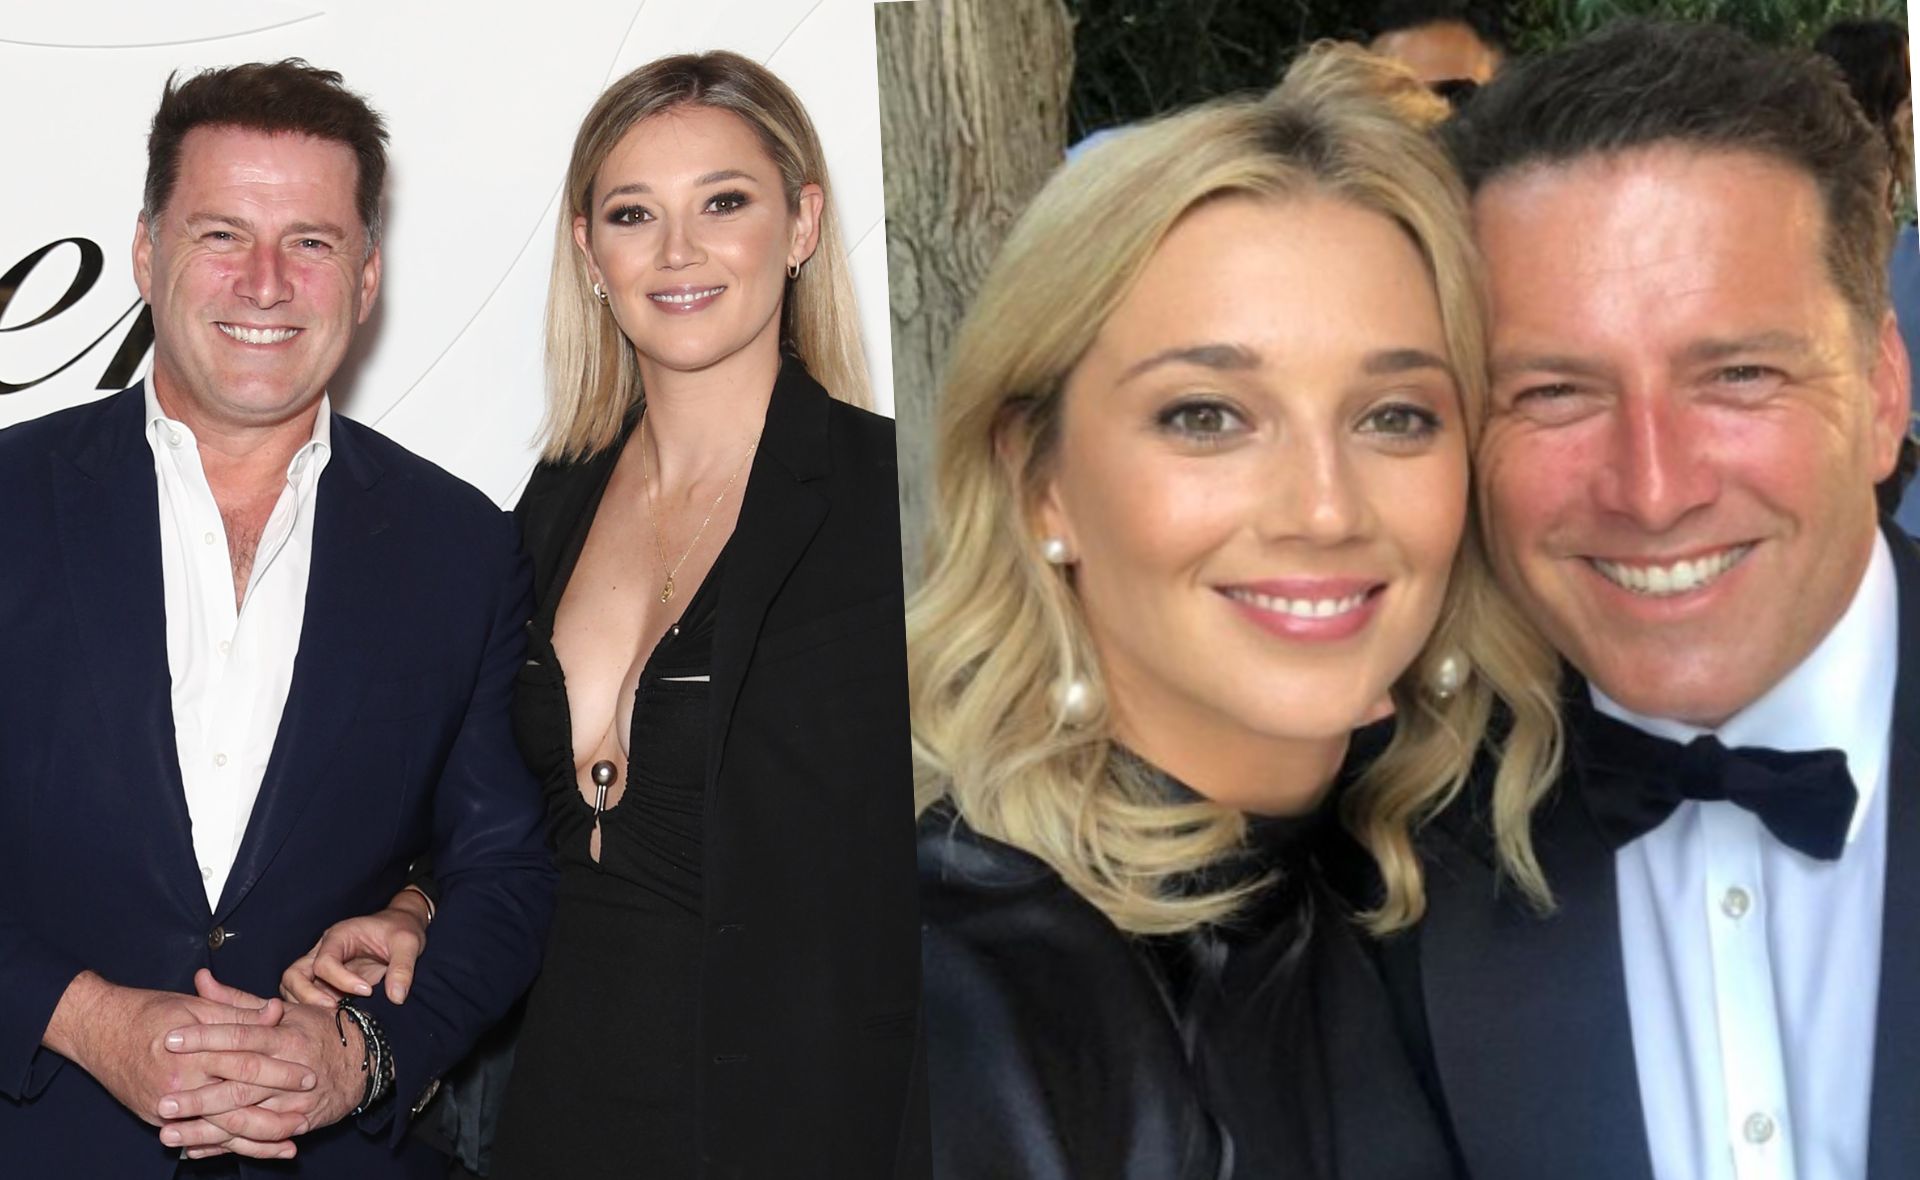 From an accidental meeting to a surprise second shot at love: Inside Karl Stefanovic and Jasmine Yarbrough’s romance